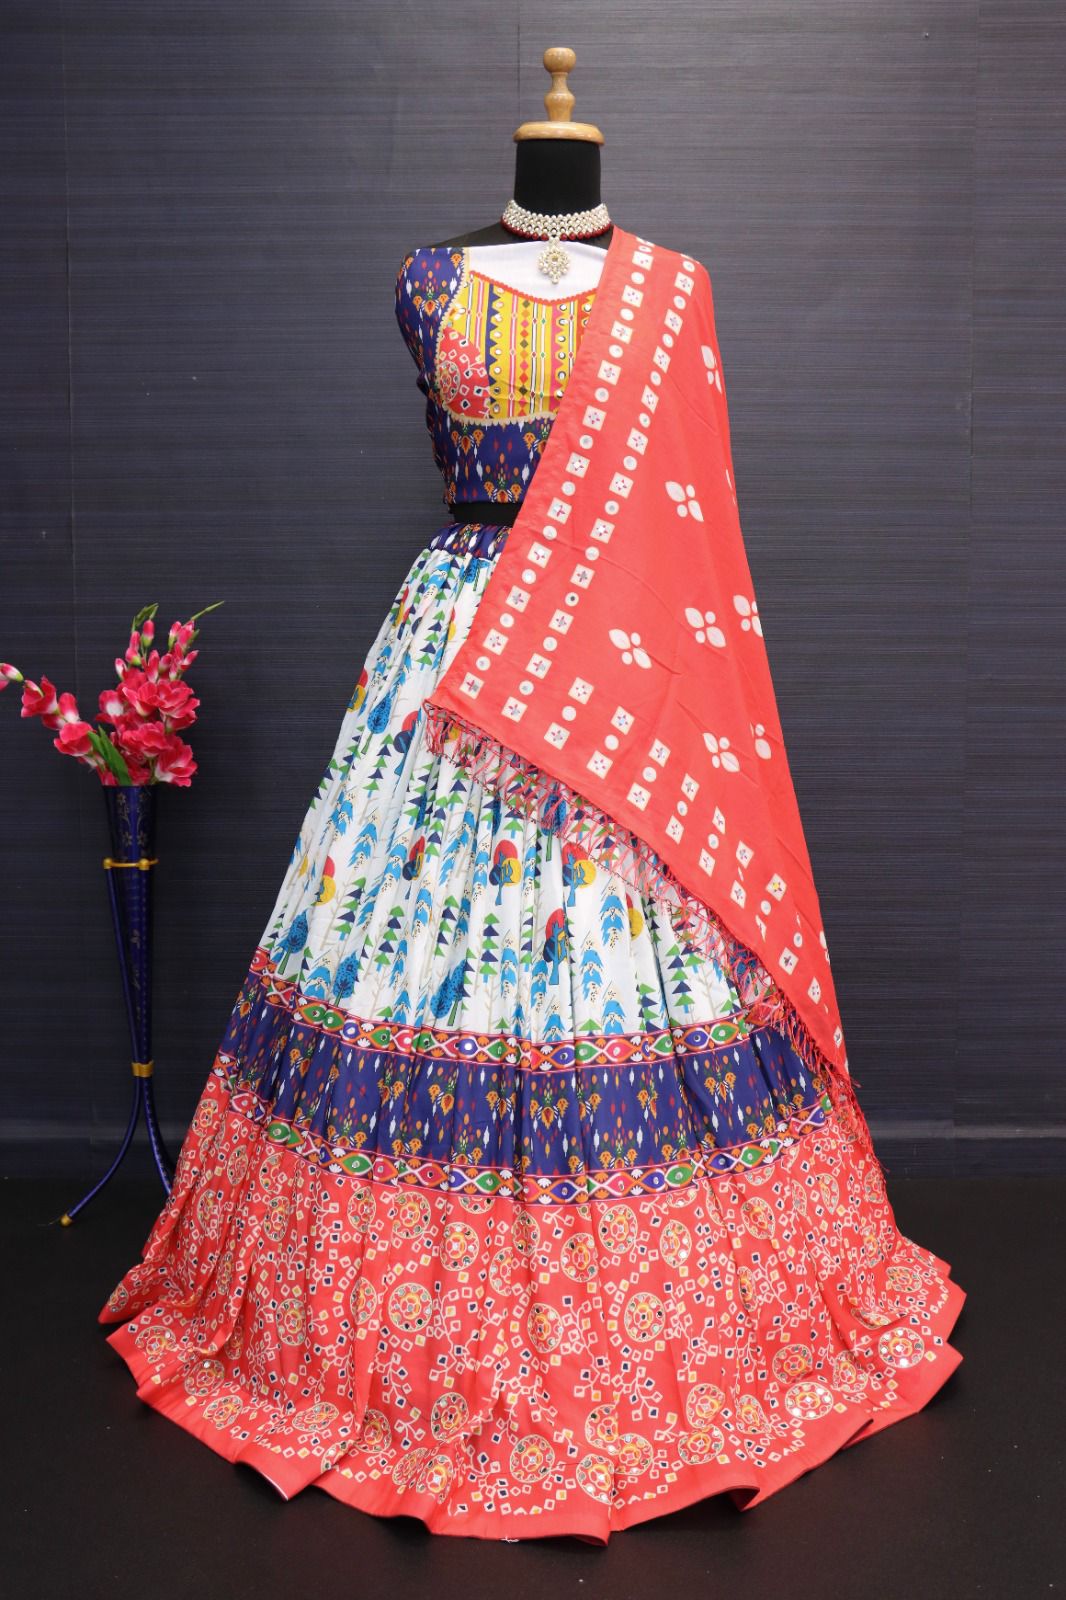 Garba Dance Dress Rental Services at Rs 400/day in Bengaluru | ID:  2852563722533